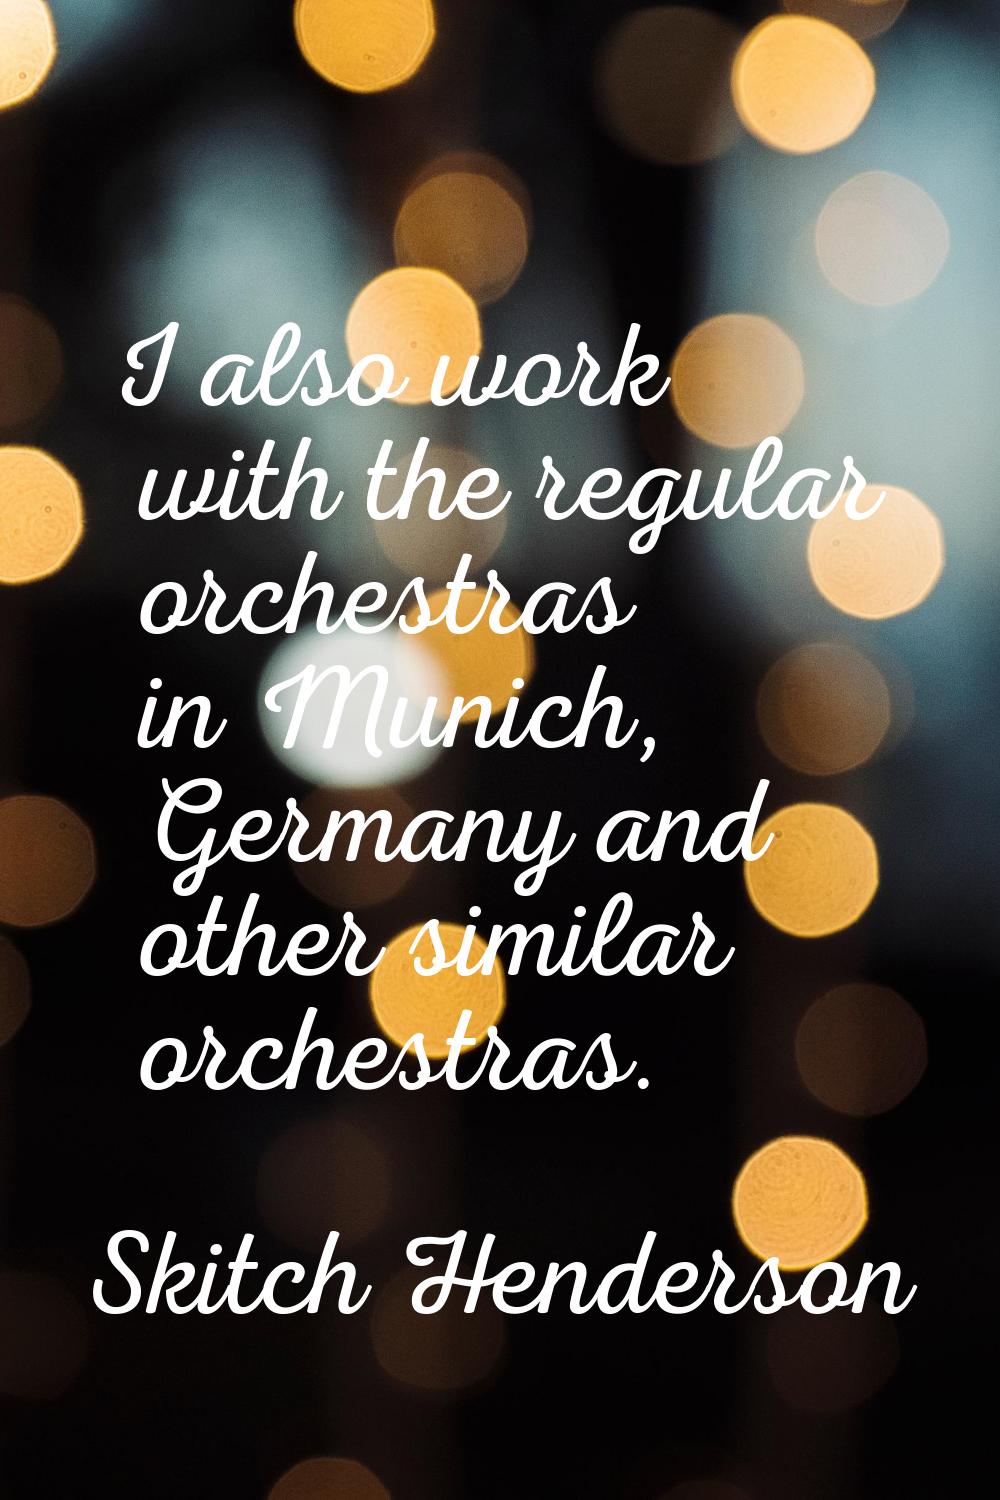 I also work with the regular orchestras in Munich, Germany and other similar orchestras.